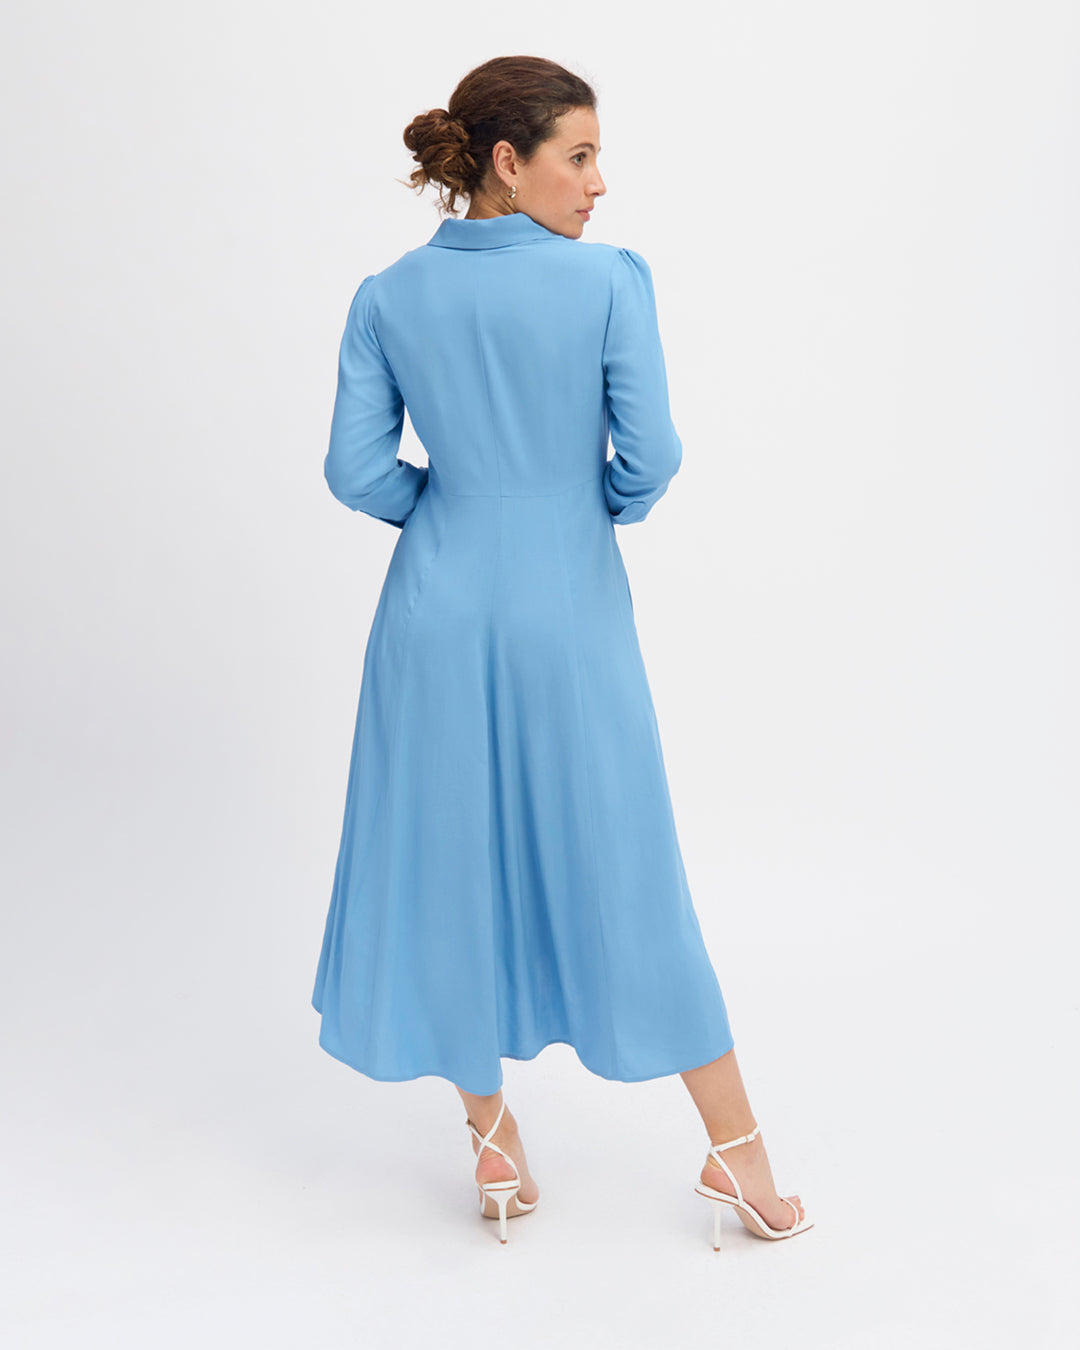 Blue-dress-Long-midday-Collar-blouse-Long-sleeves-with-buttoned-knuckles-Hidden-button-flap-Fitted-at-the-waist-17H10-tailors-for-women-paris-